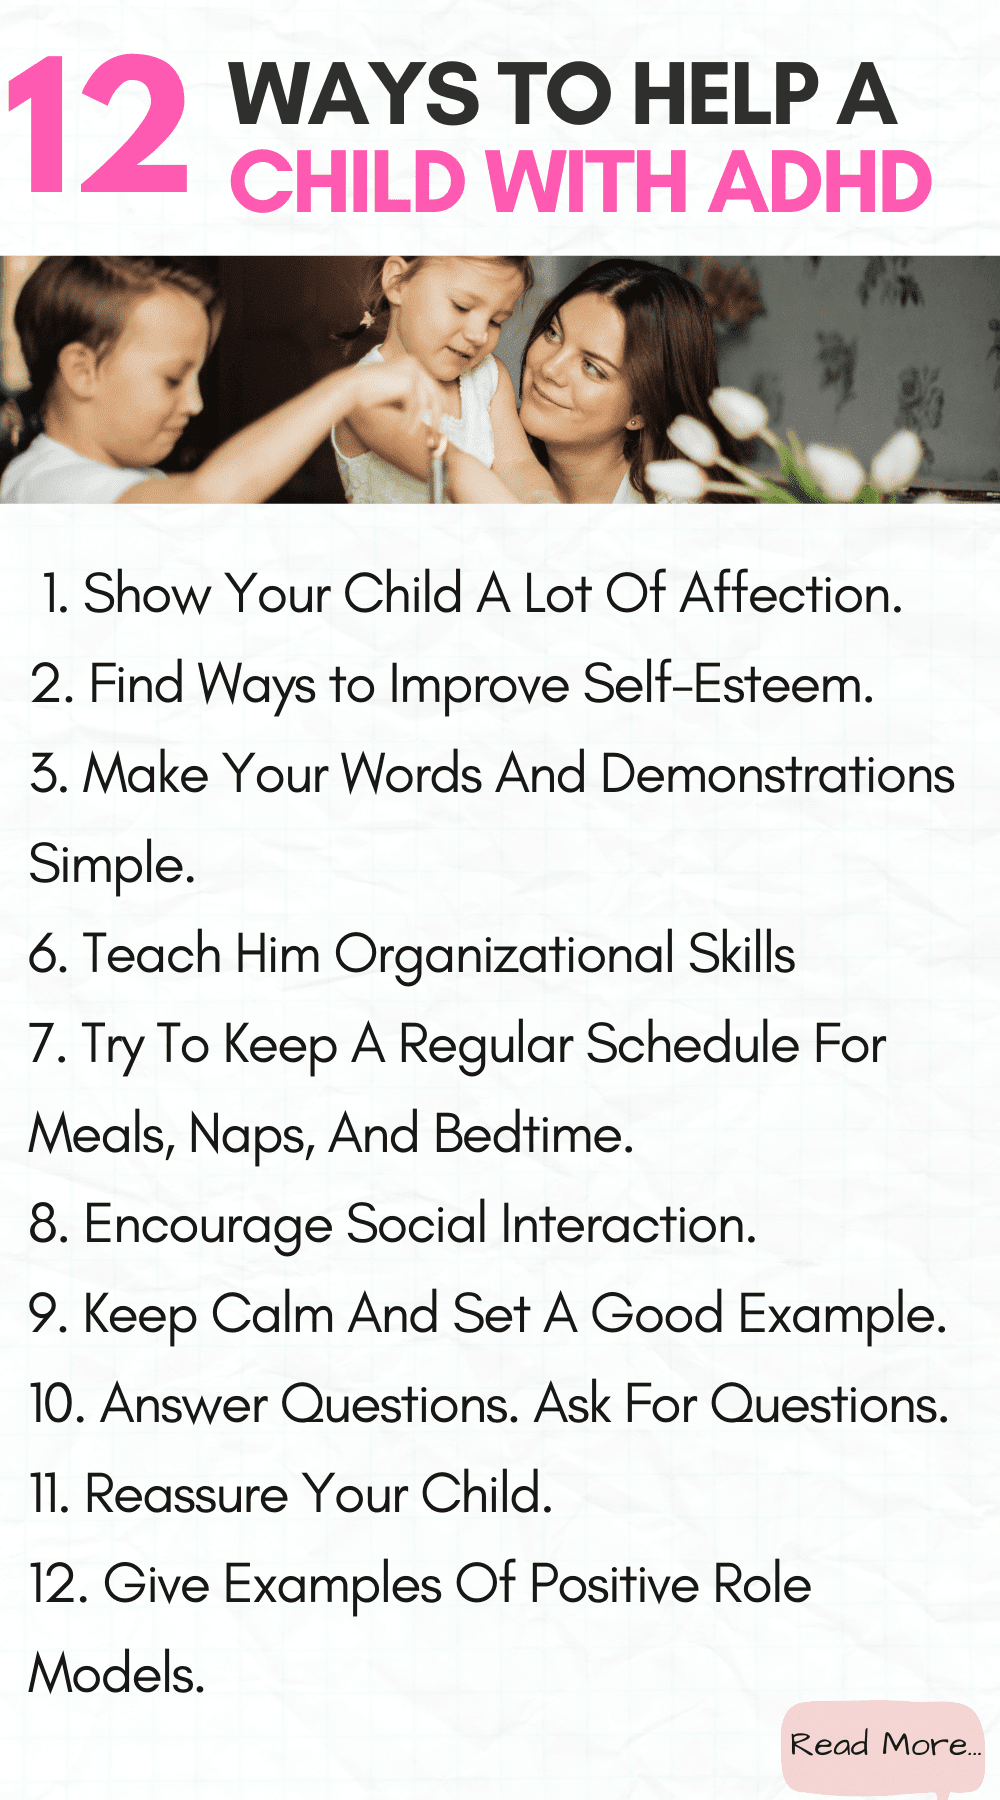 adhd-in-children-21-ways-to-deal-with-adhd-without-medication-2